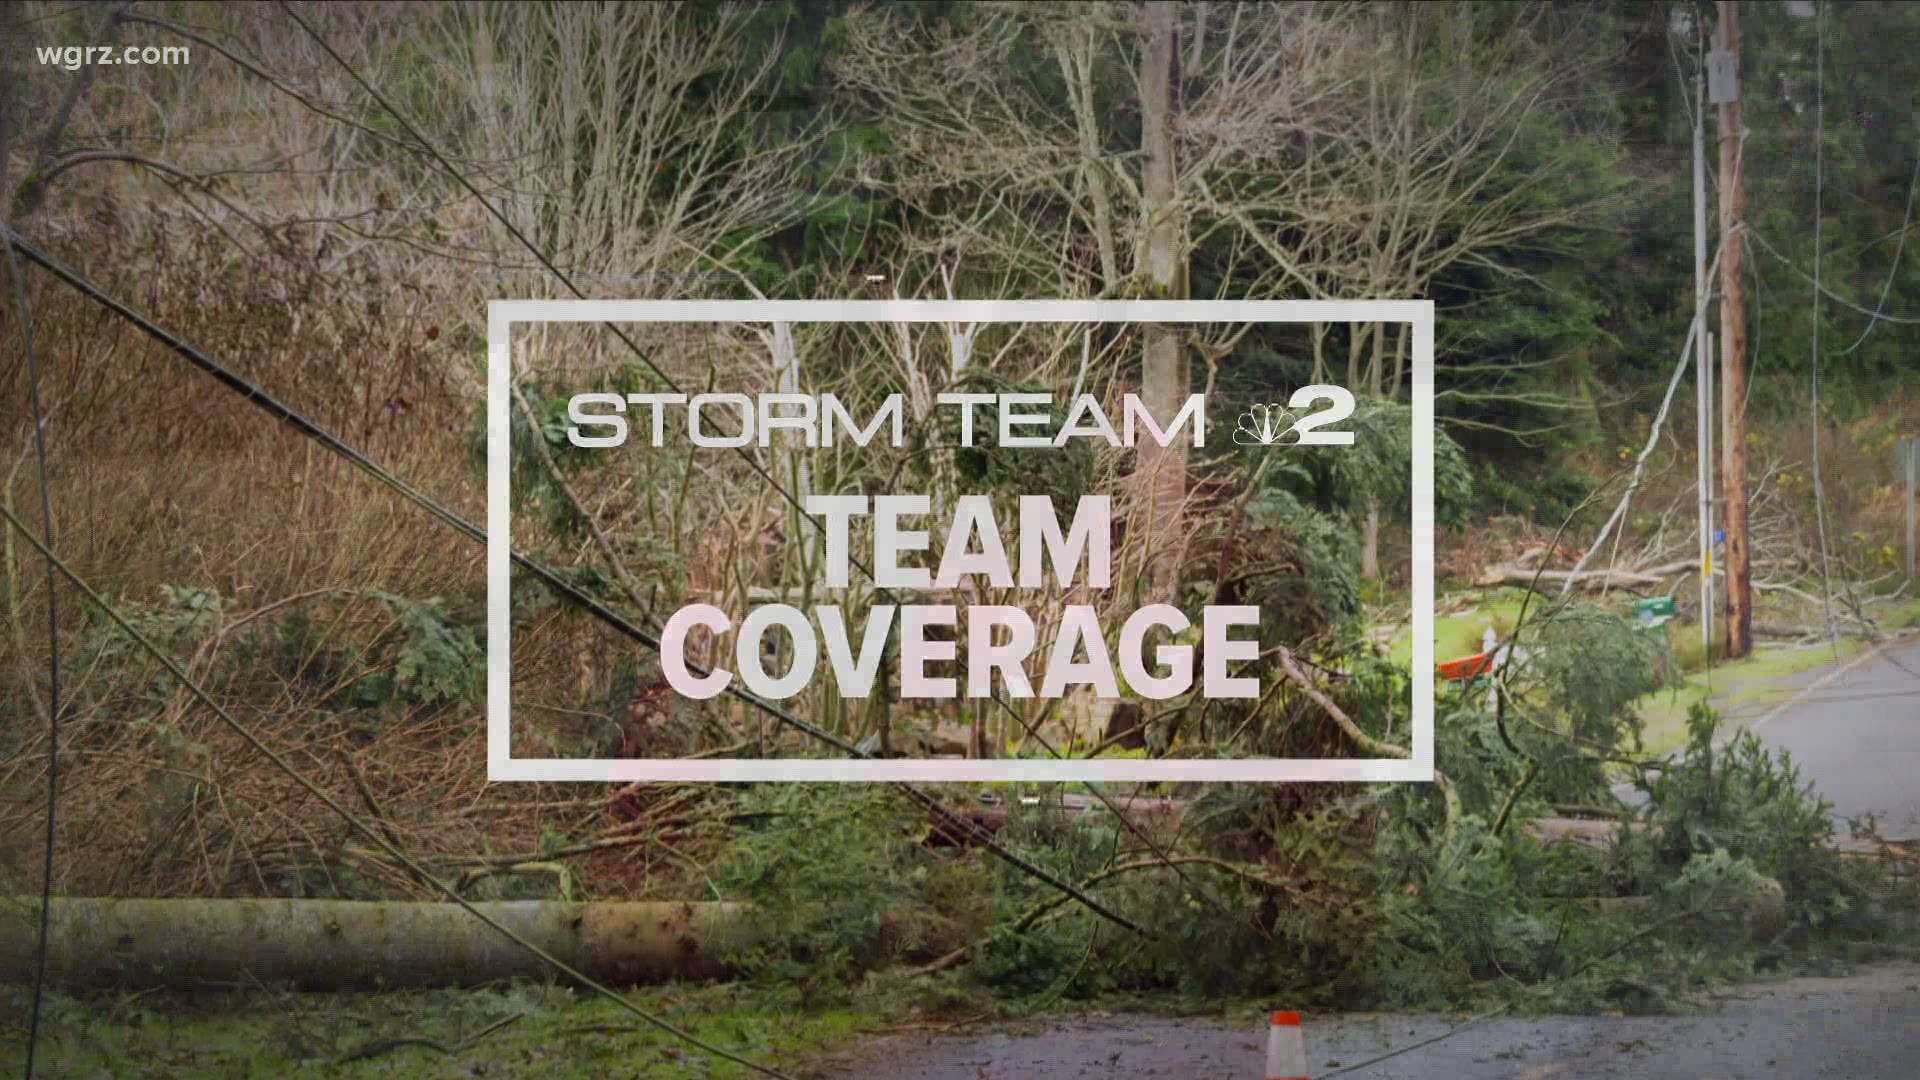 Our crews are spread across the region, giving you live updates of everything you need to know.